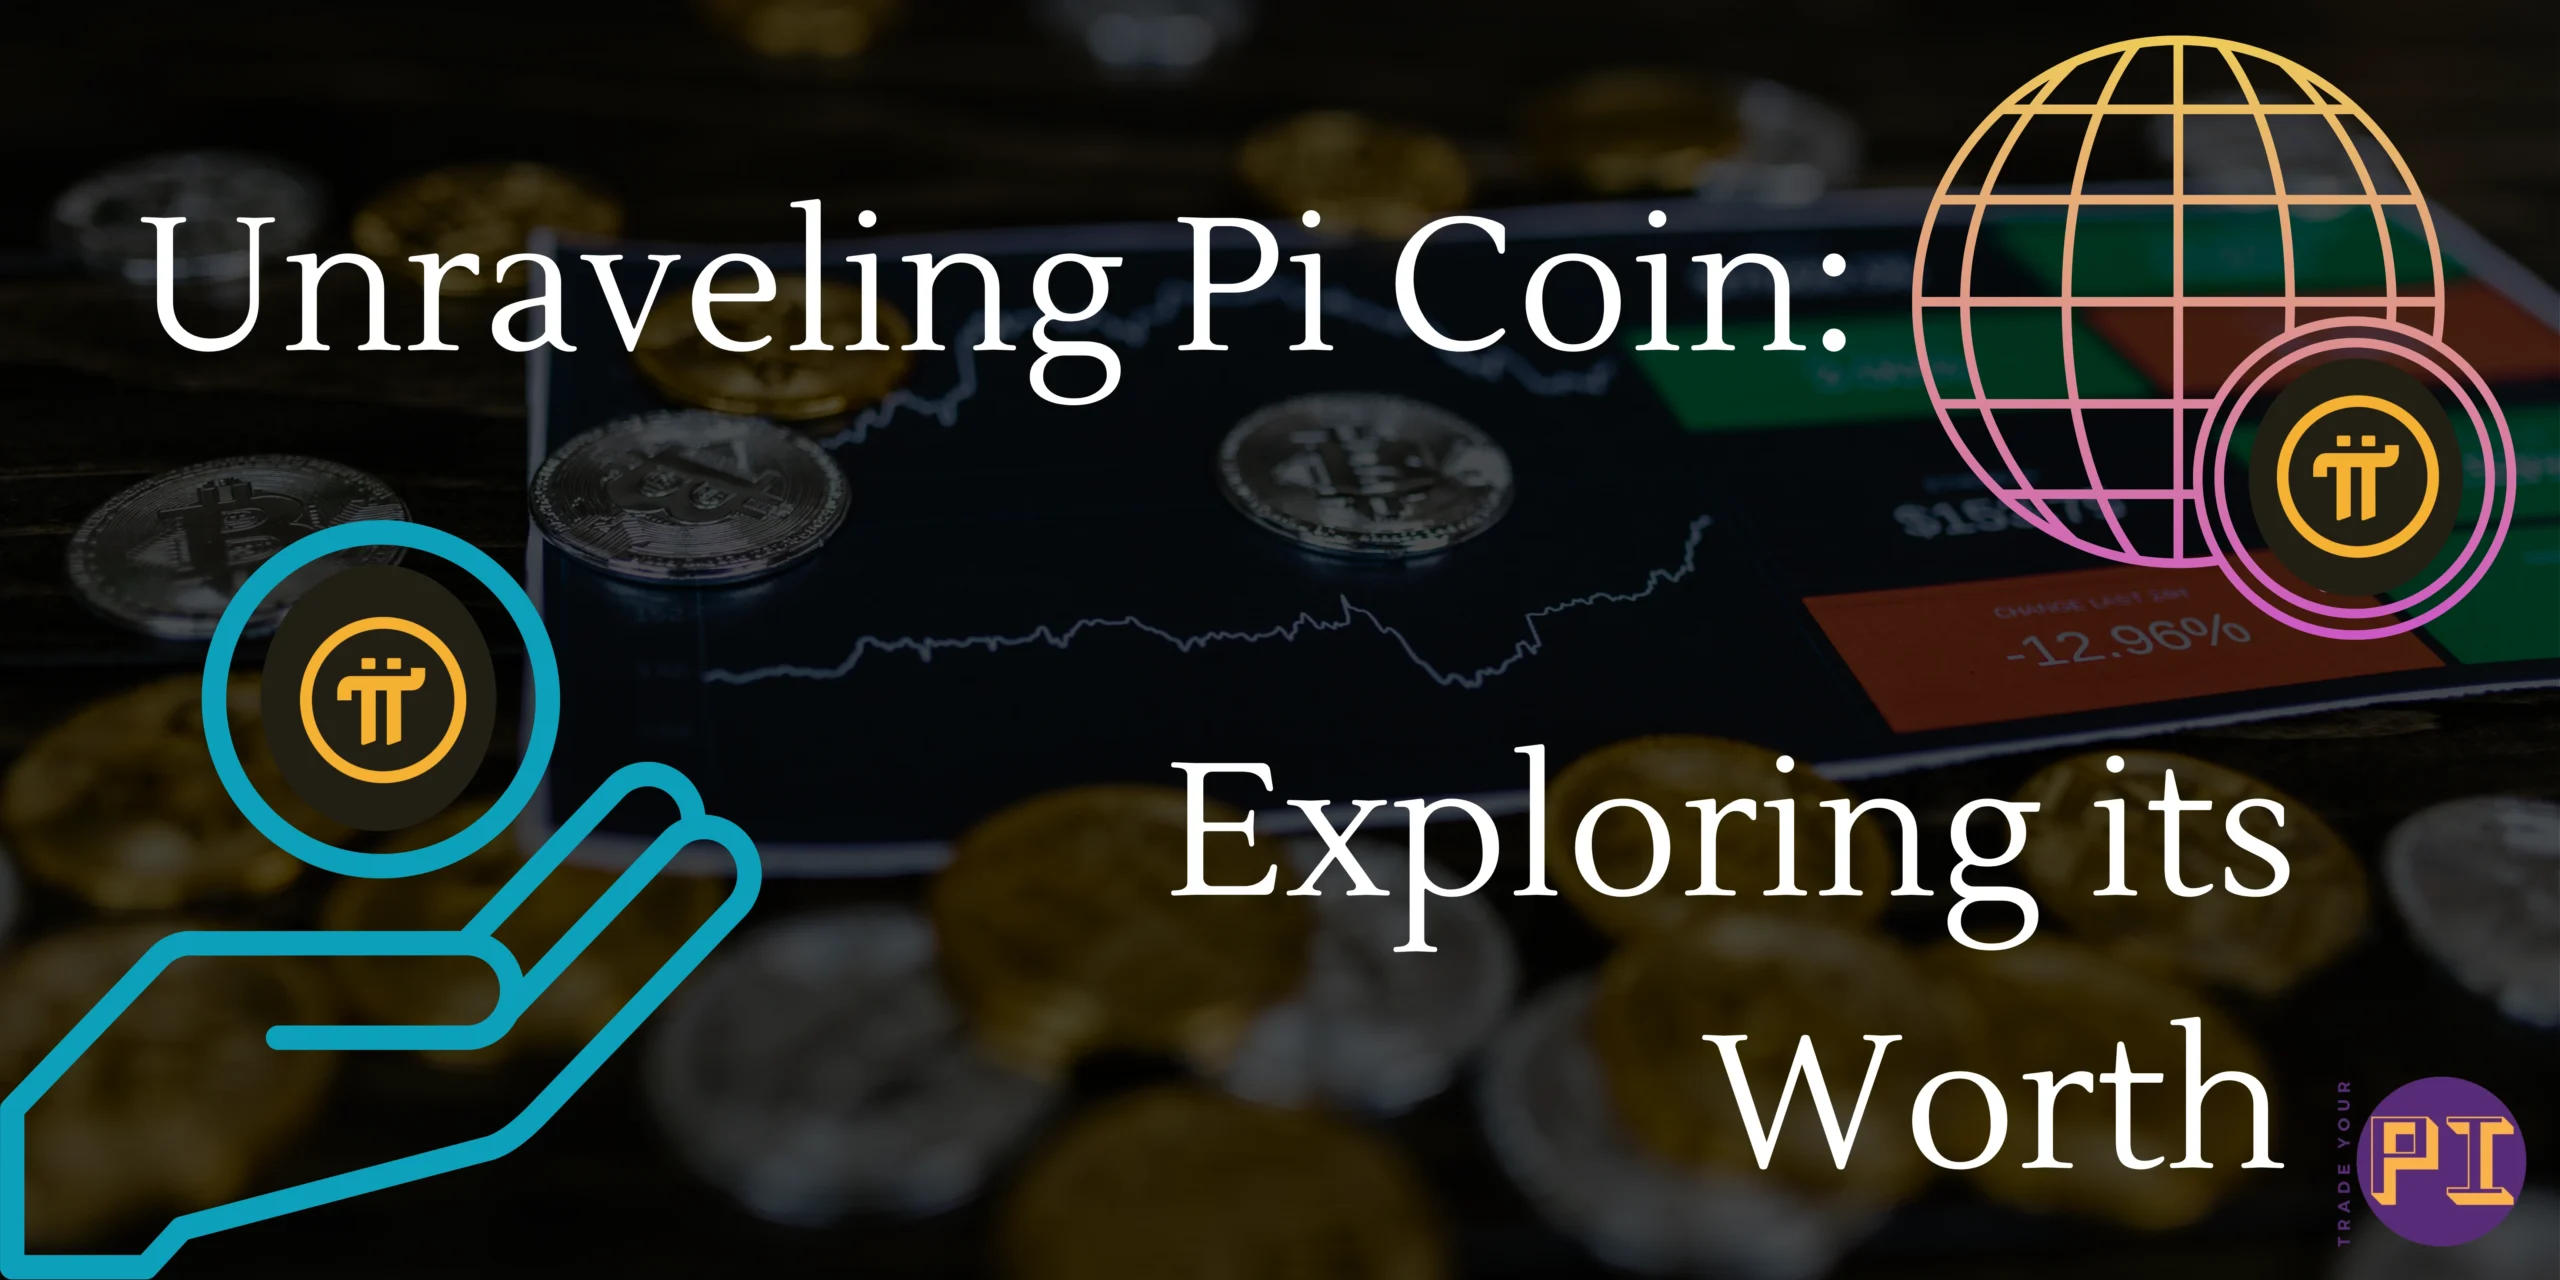 Unraveling Pi Coin: Exploring its Worth